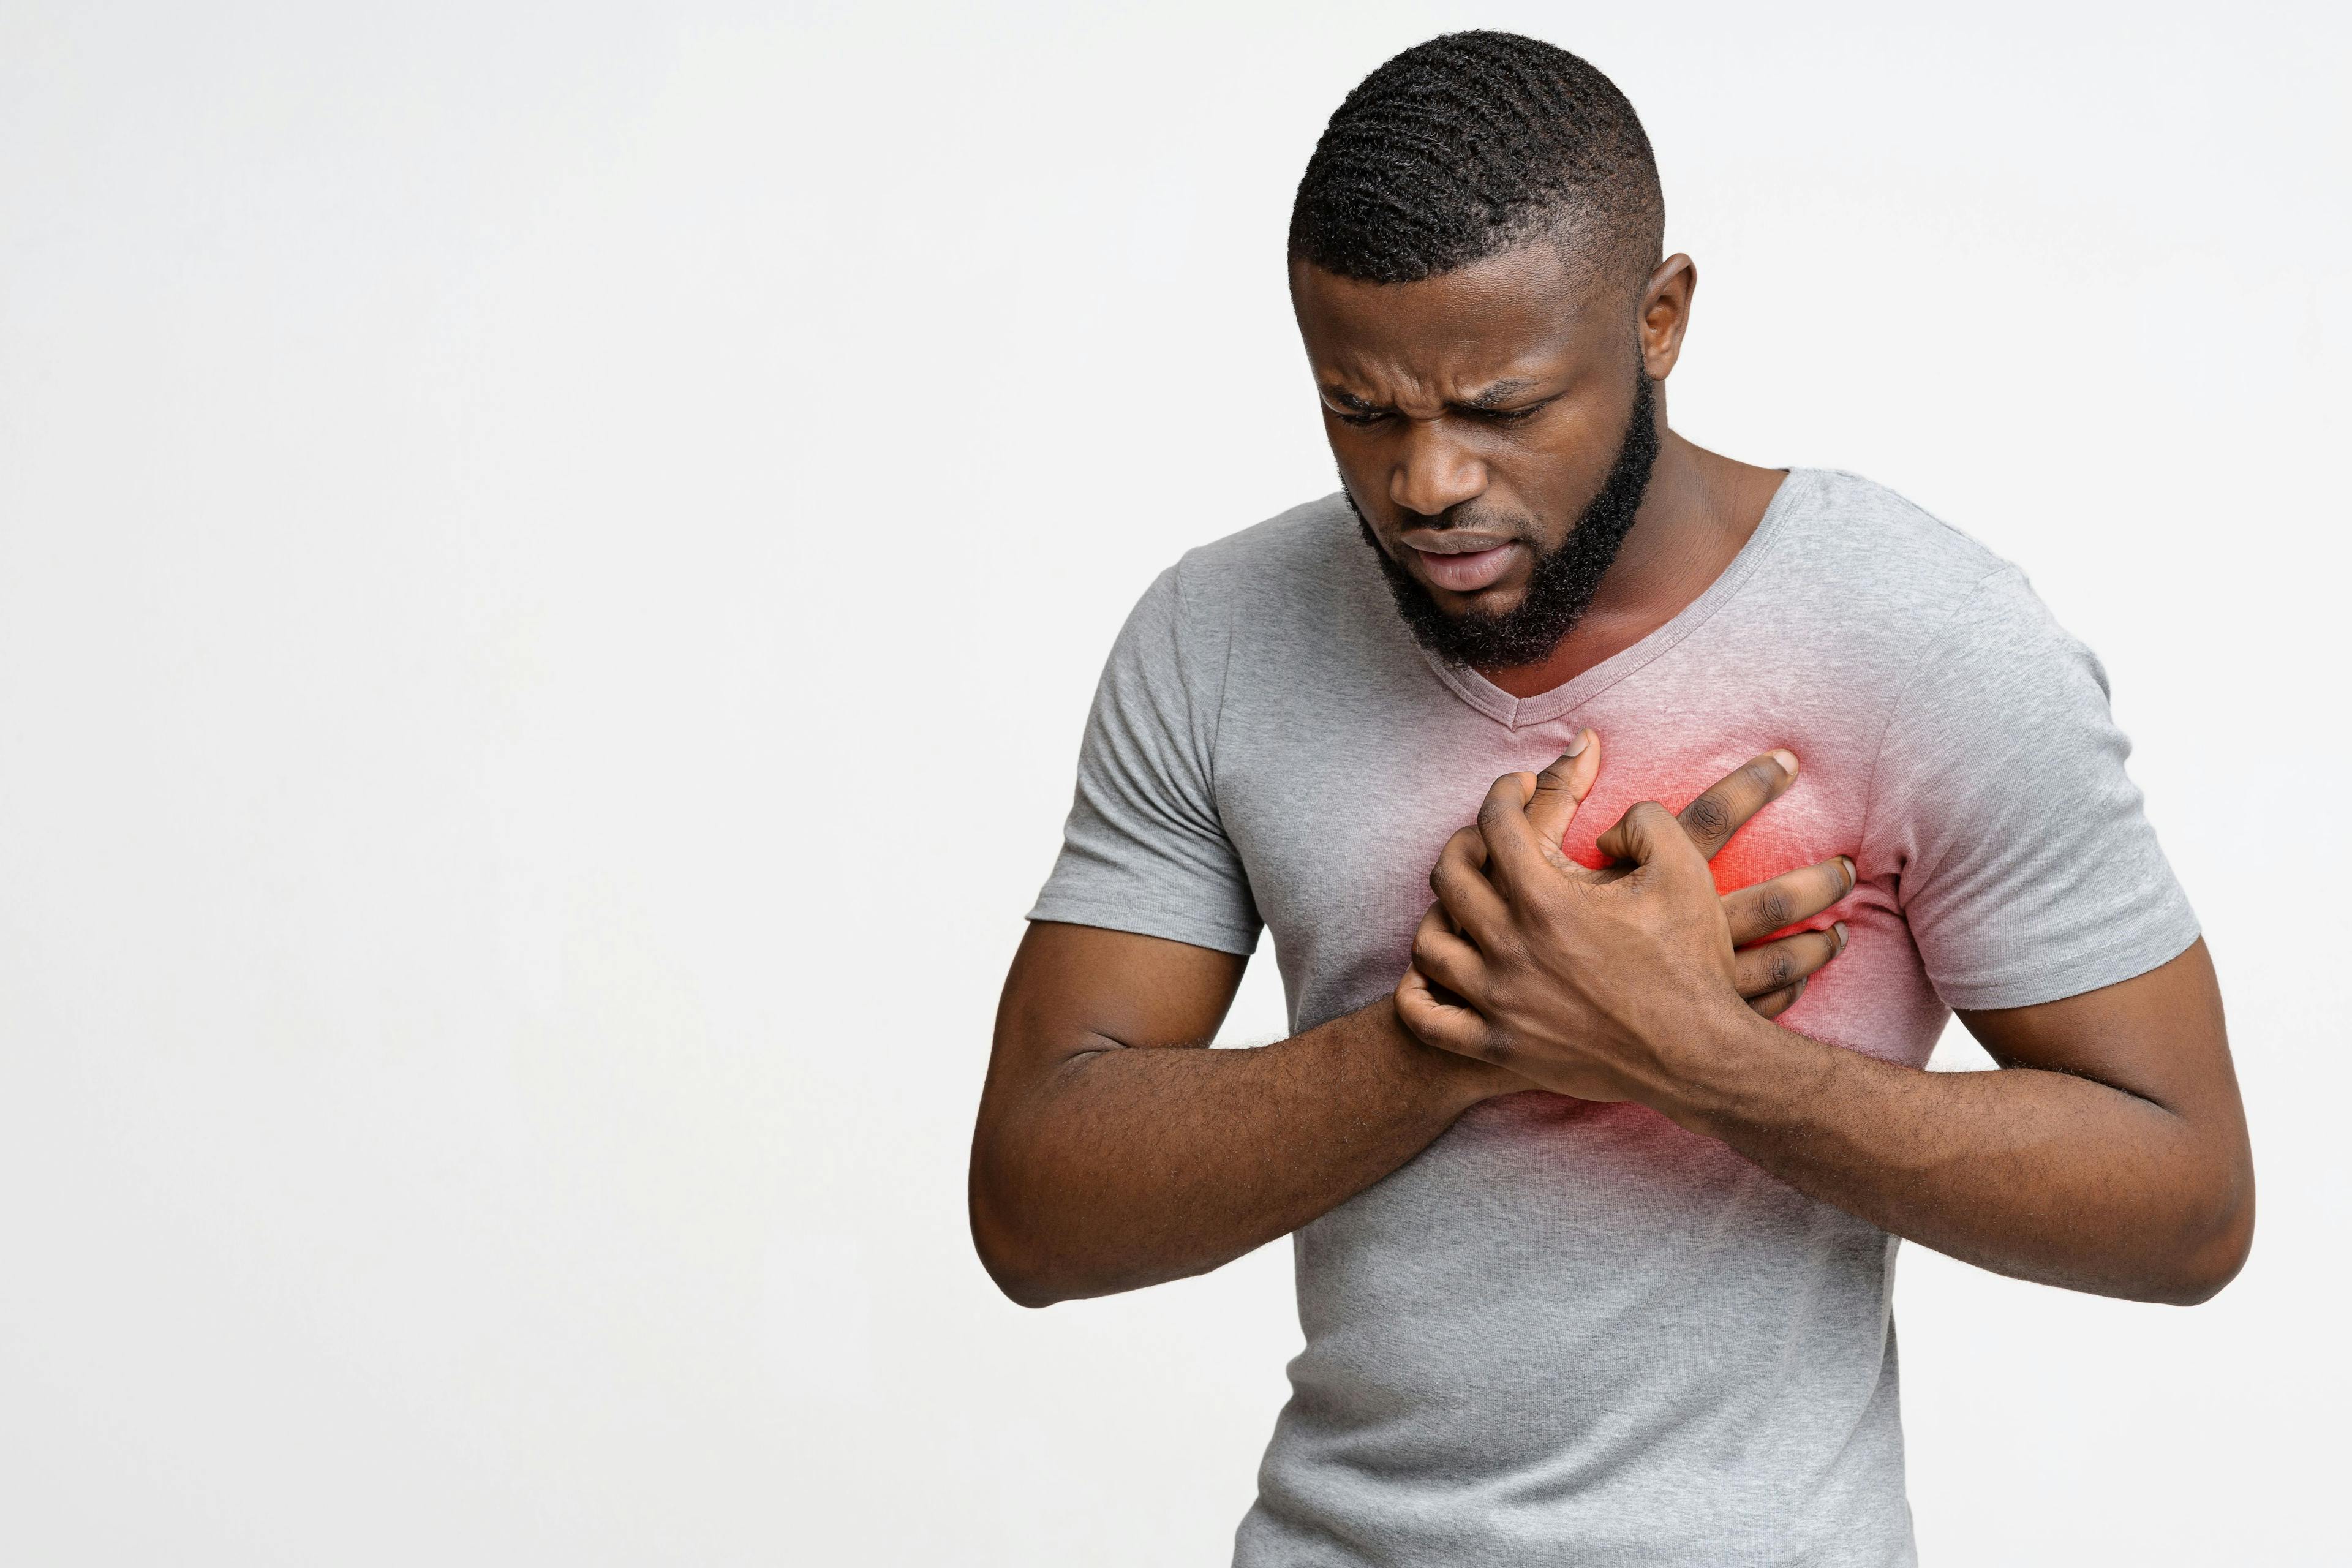 Young black guy having heart attack, holding his chest | Image credit: Prostock-studio - stock.adobe.com